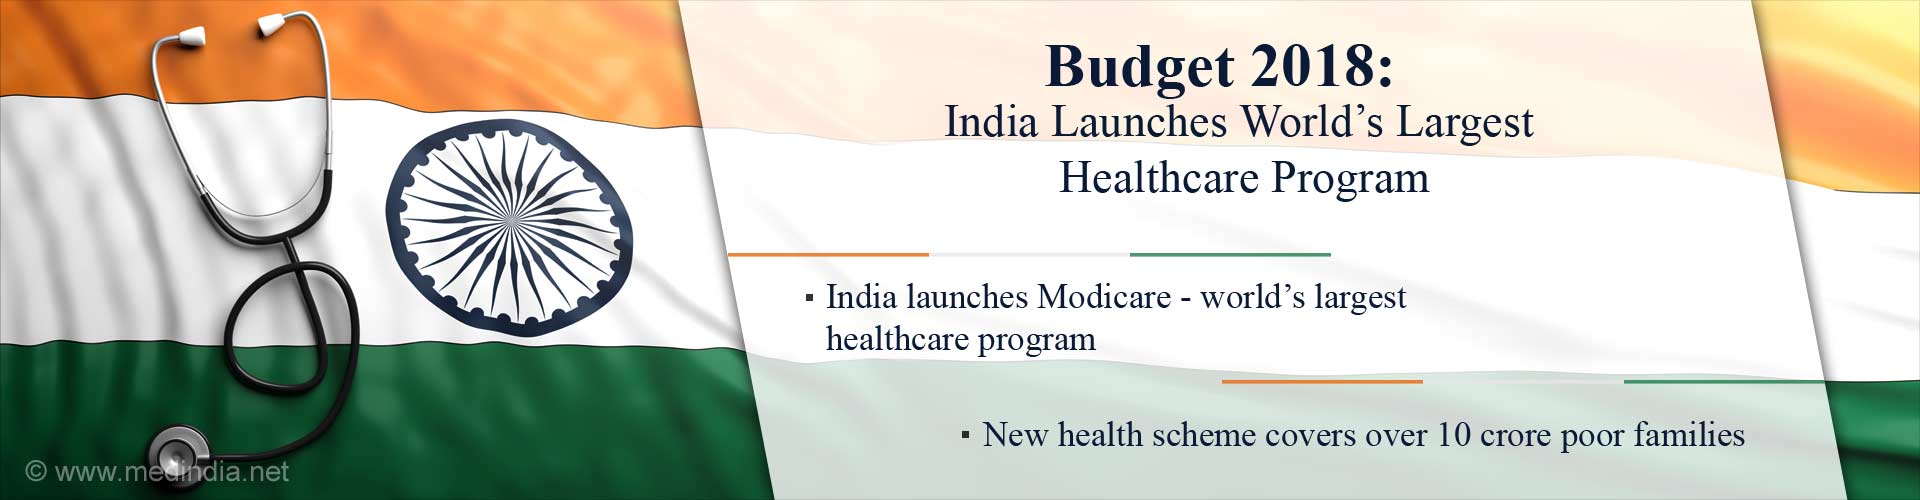 budget 2018: India Launches World''s Largest Healthcare Program
- India launches modicare-world''s largest healthcare program
- new health scheme covers over 10 crore poor families